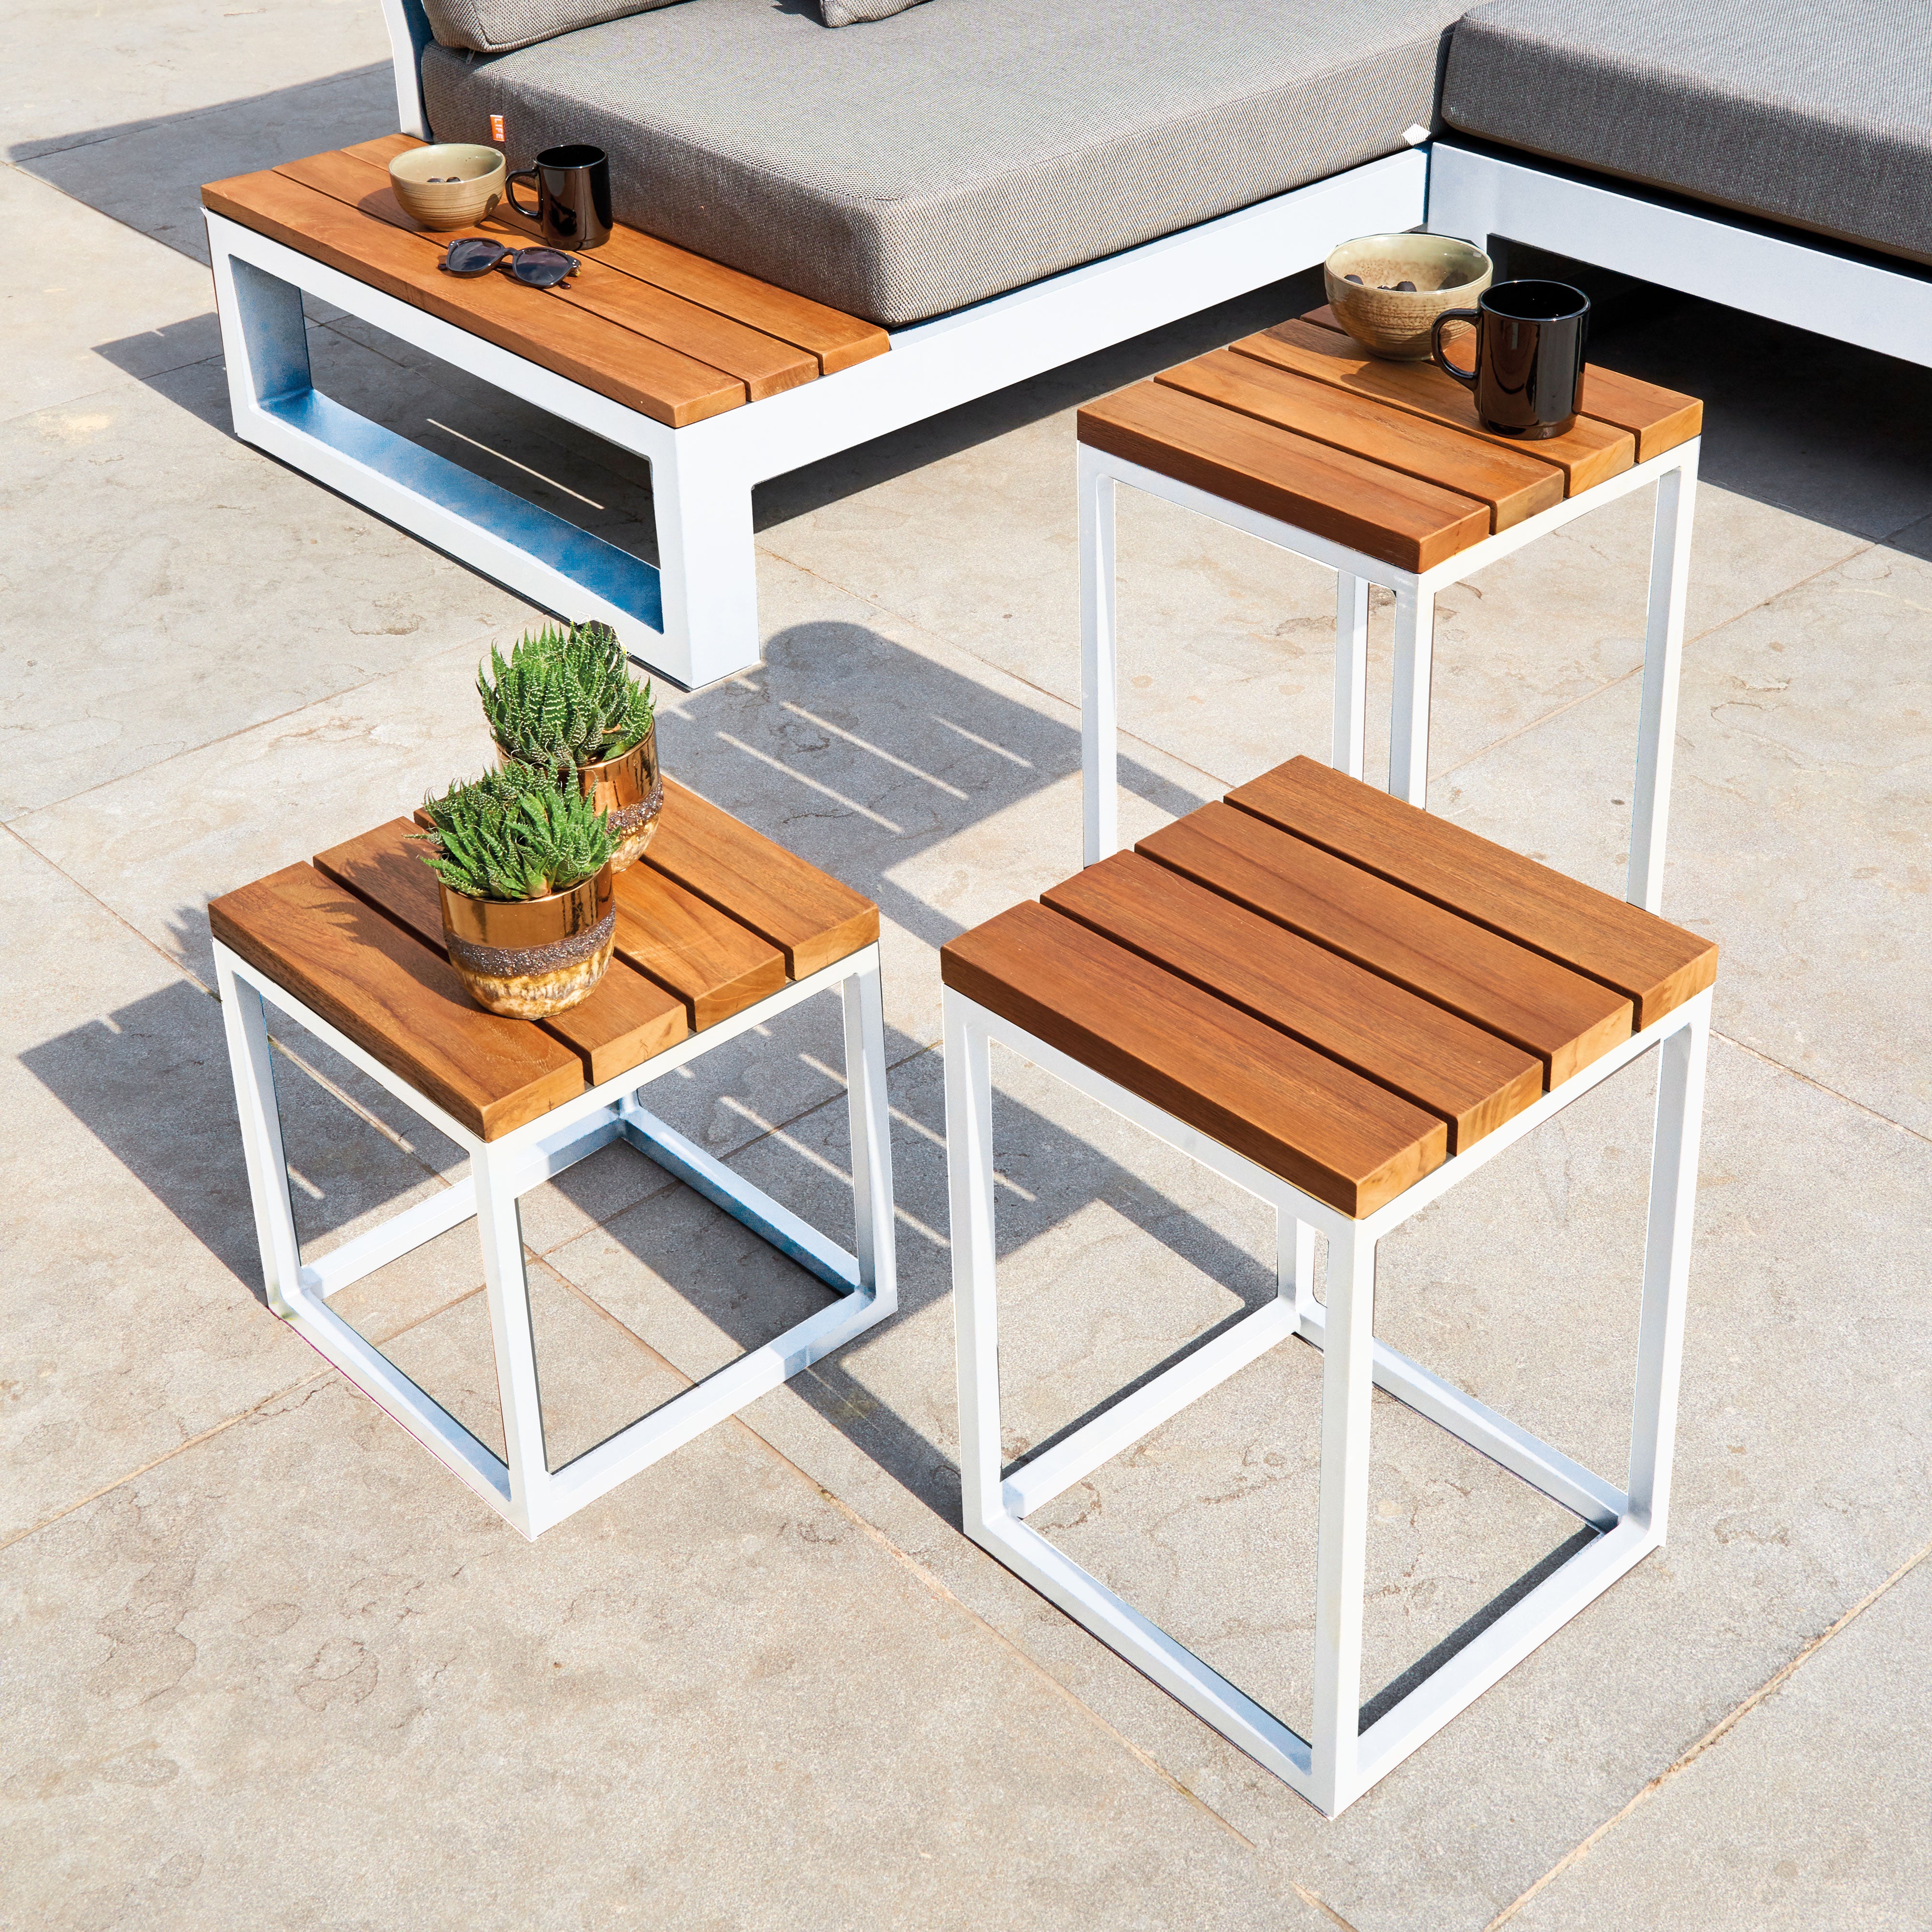 Add more functional dining and entertaining space with the Gili aluminum and FSC Certified teak coffee table and side tables. This versatile collection can accommodate any outdoor space from an intimate balcony area to a more spacious patio or deck.